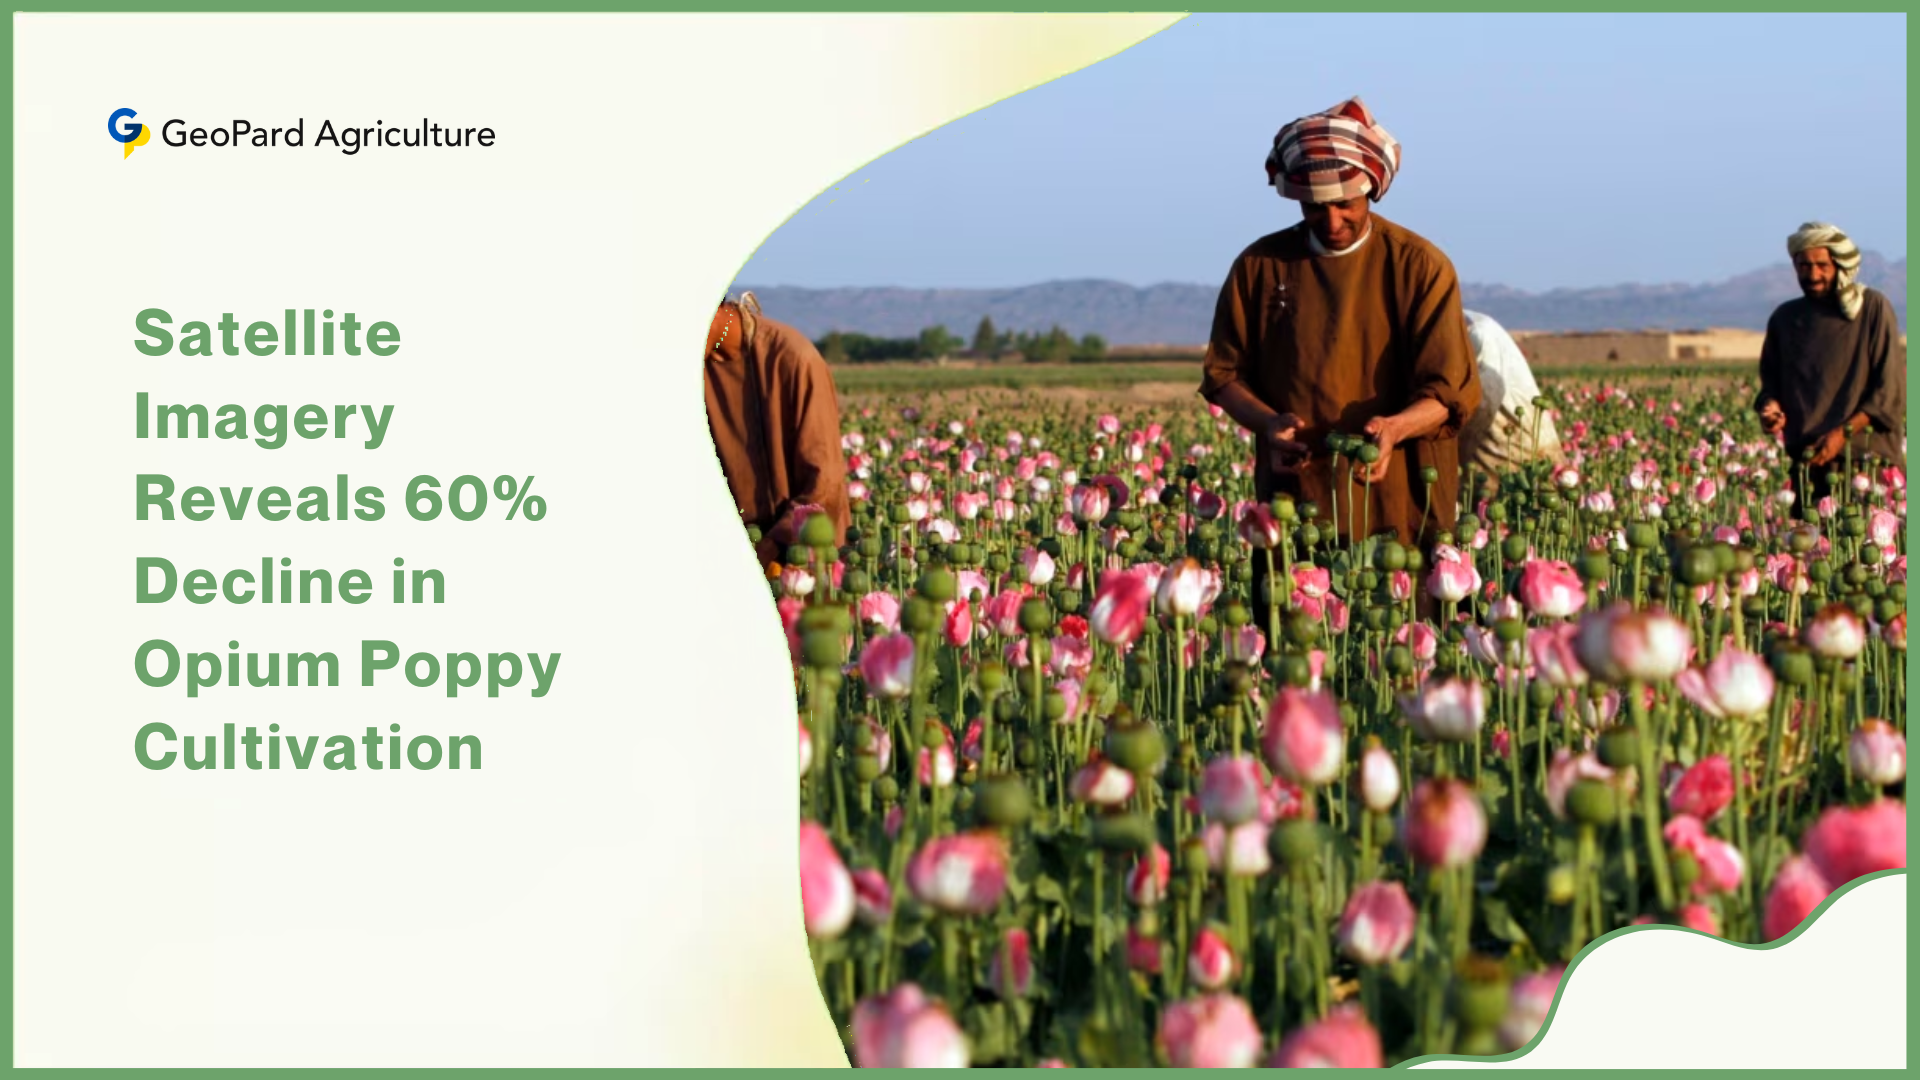 Satellite Imagery Reveals 60% Decline in Opium Poppy Cultivation